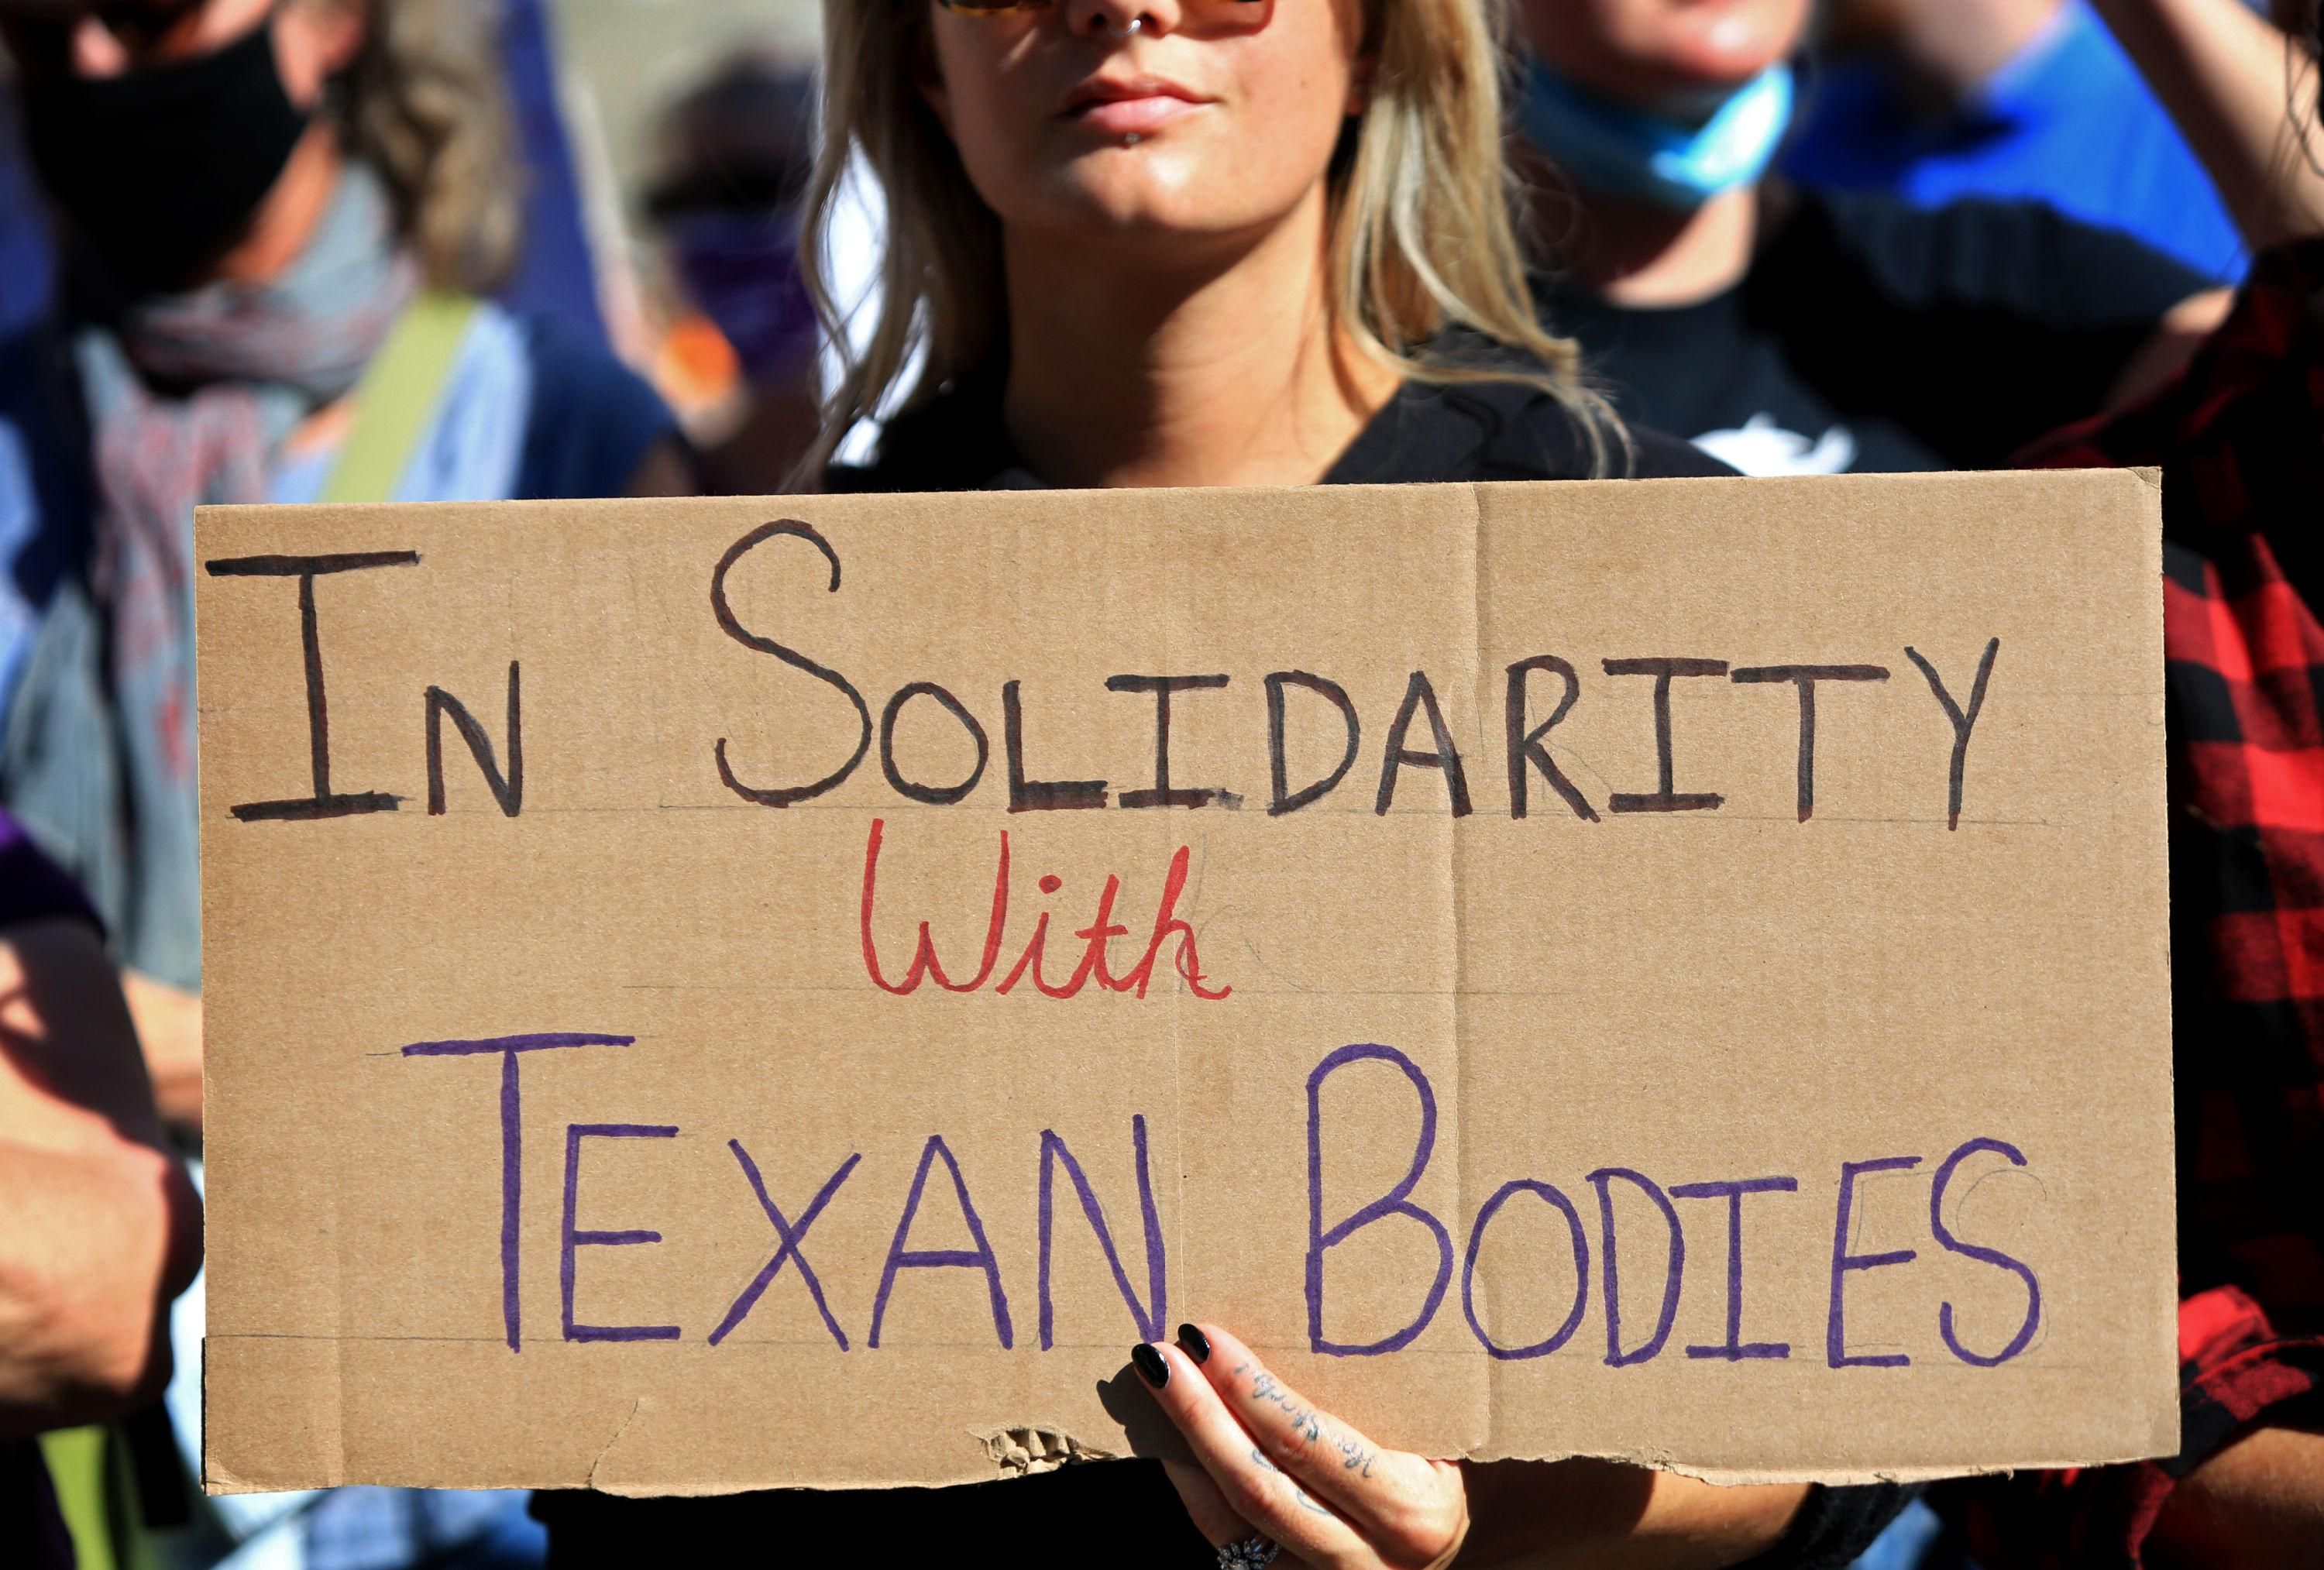 Sign says in solidarity with Texan bodies